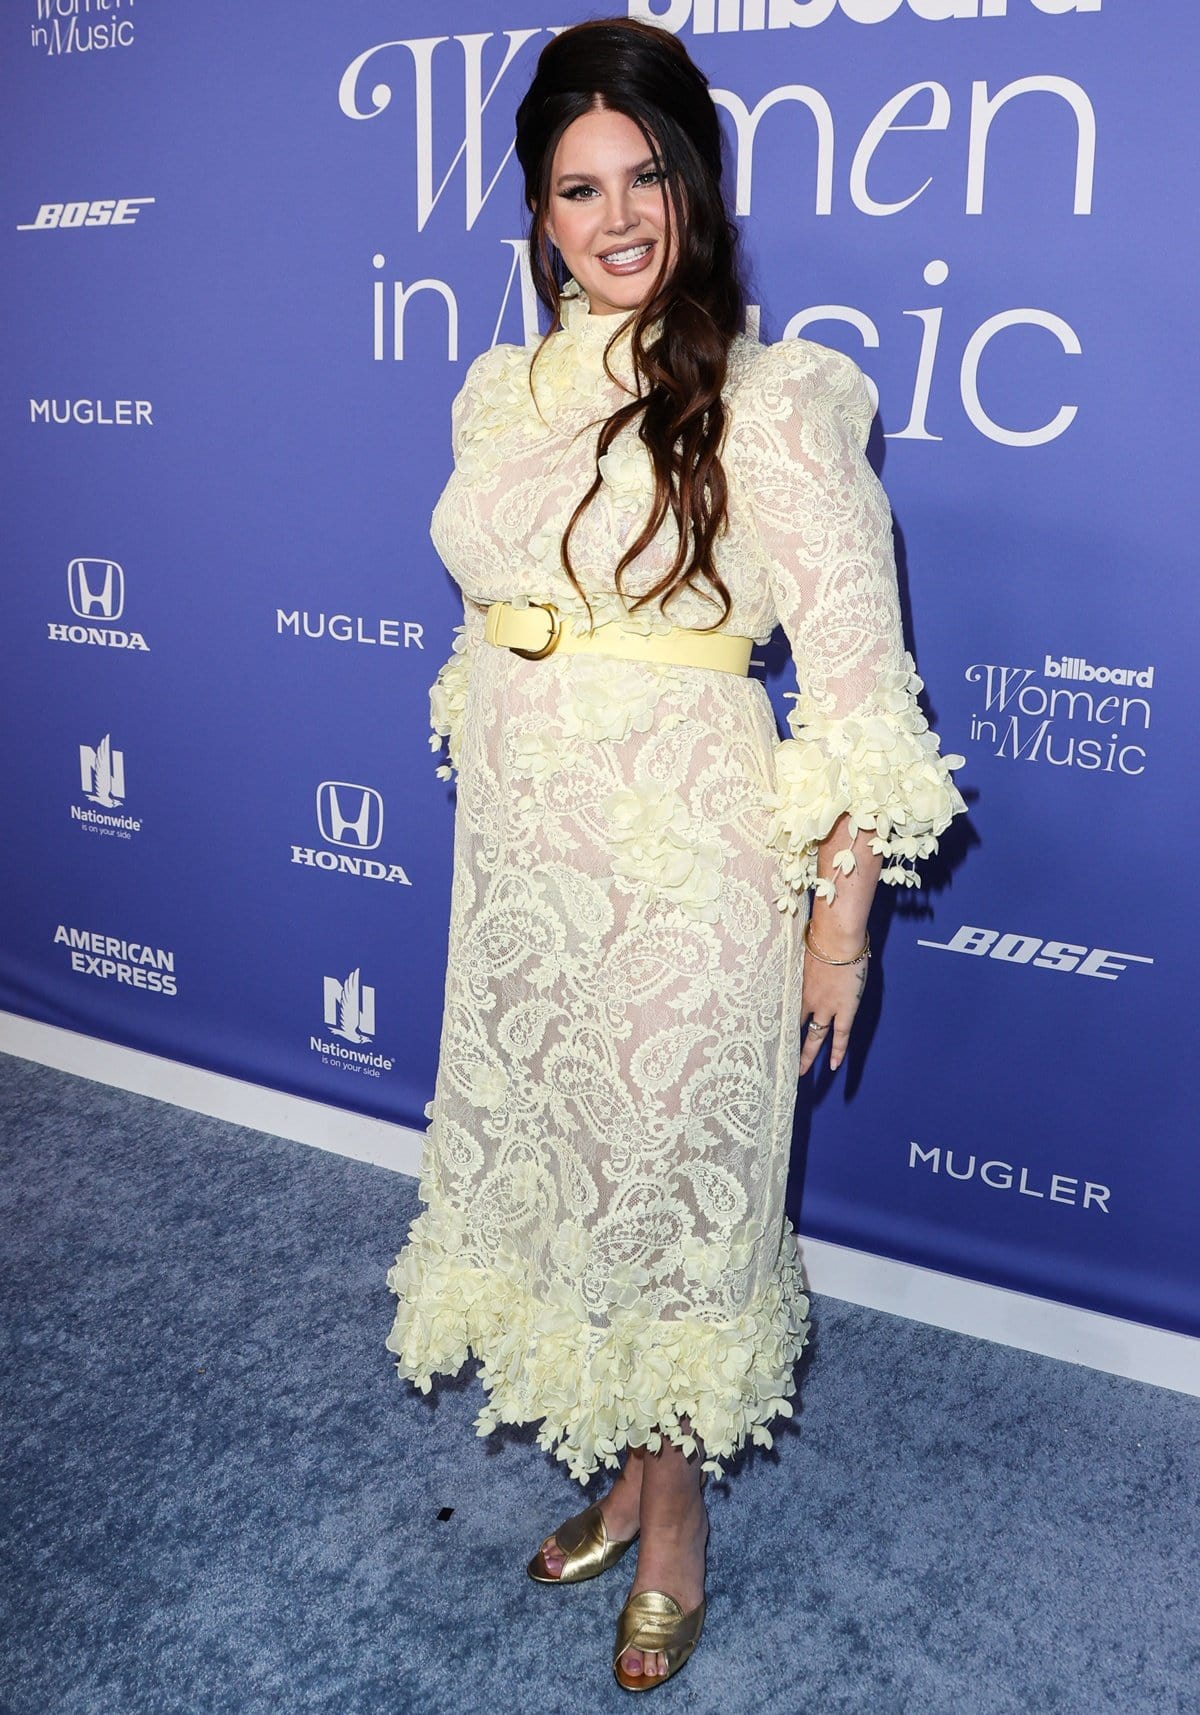 Lana Del Rey made a fashionable entrance in a vibrant yellow paisley lace dress from Zimmermann adorned with floral appliqués on the sleeves, hemline, and skirt at the 2023 Billboard Women In Music